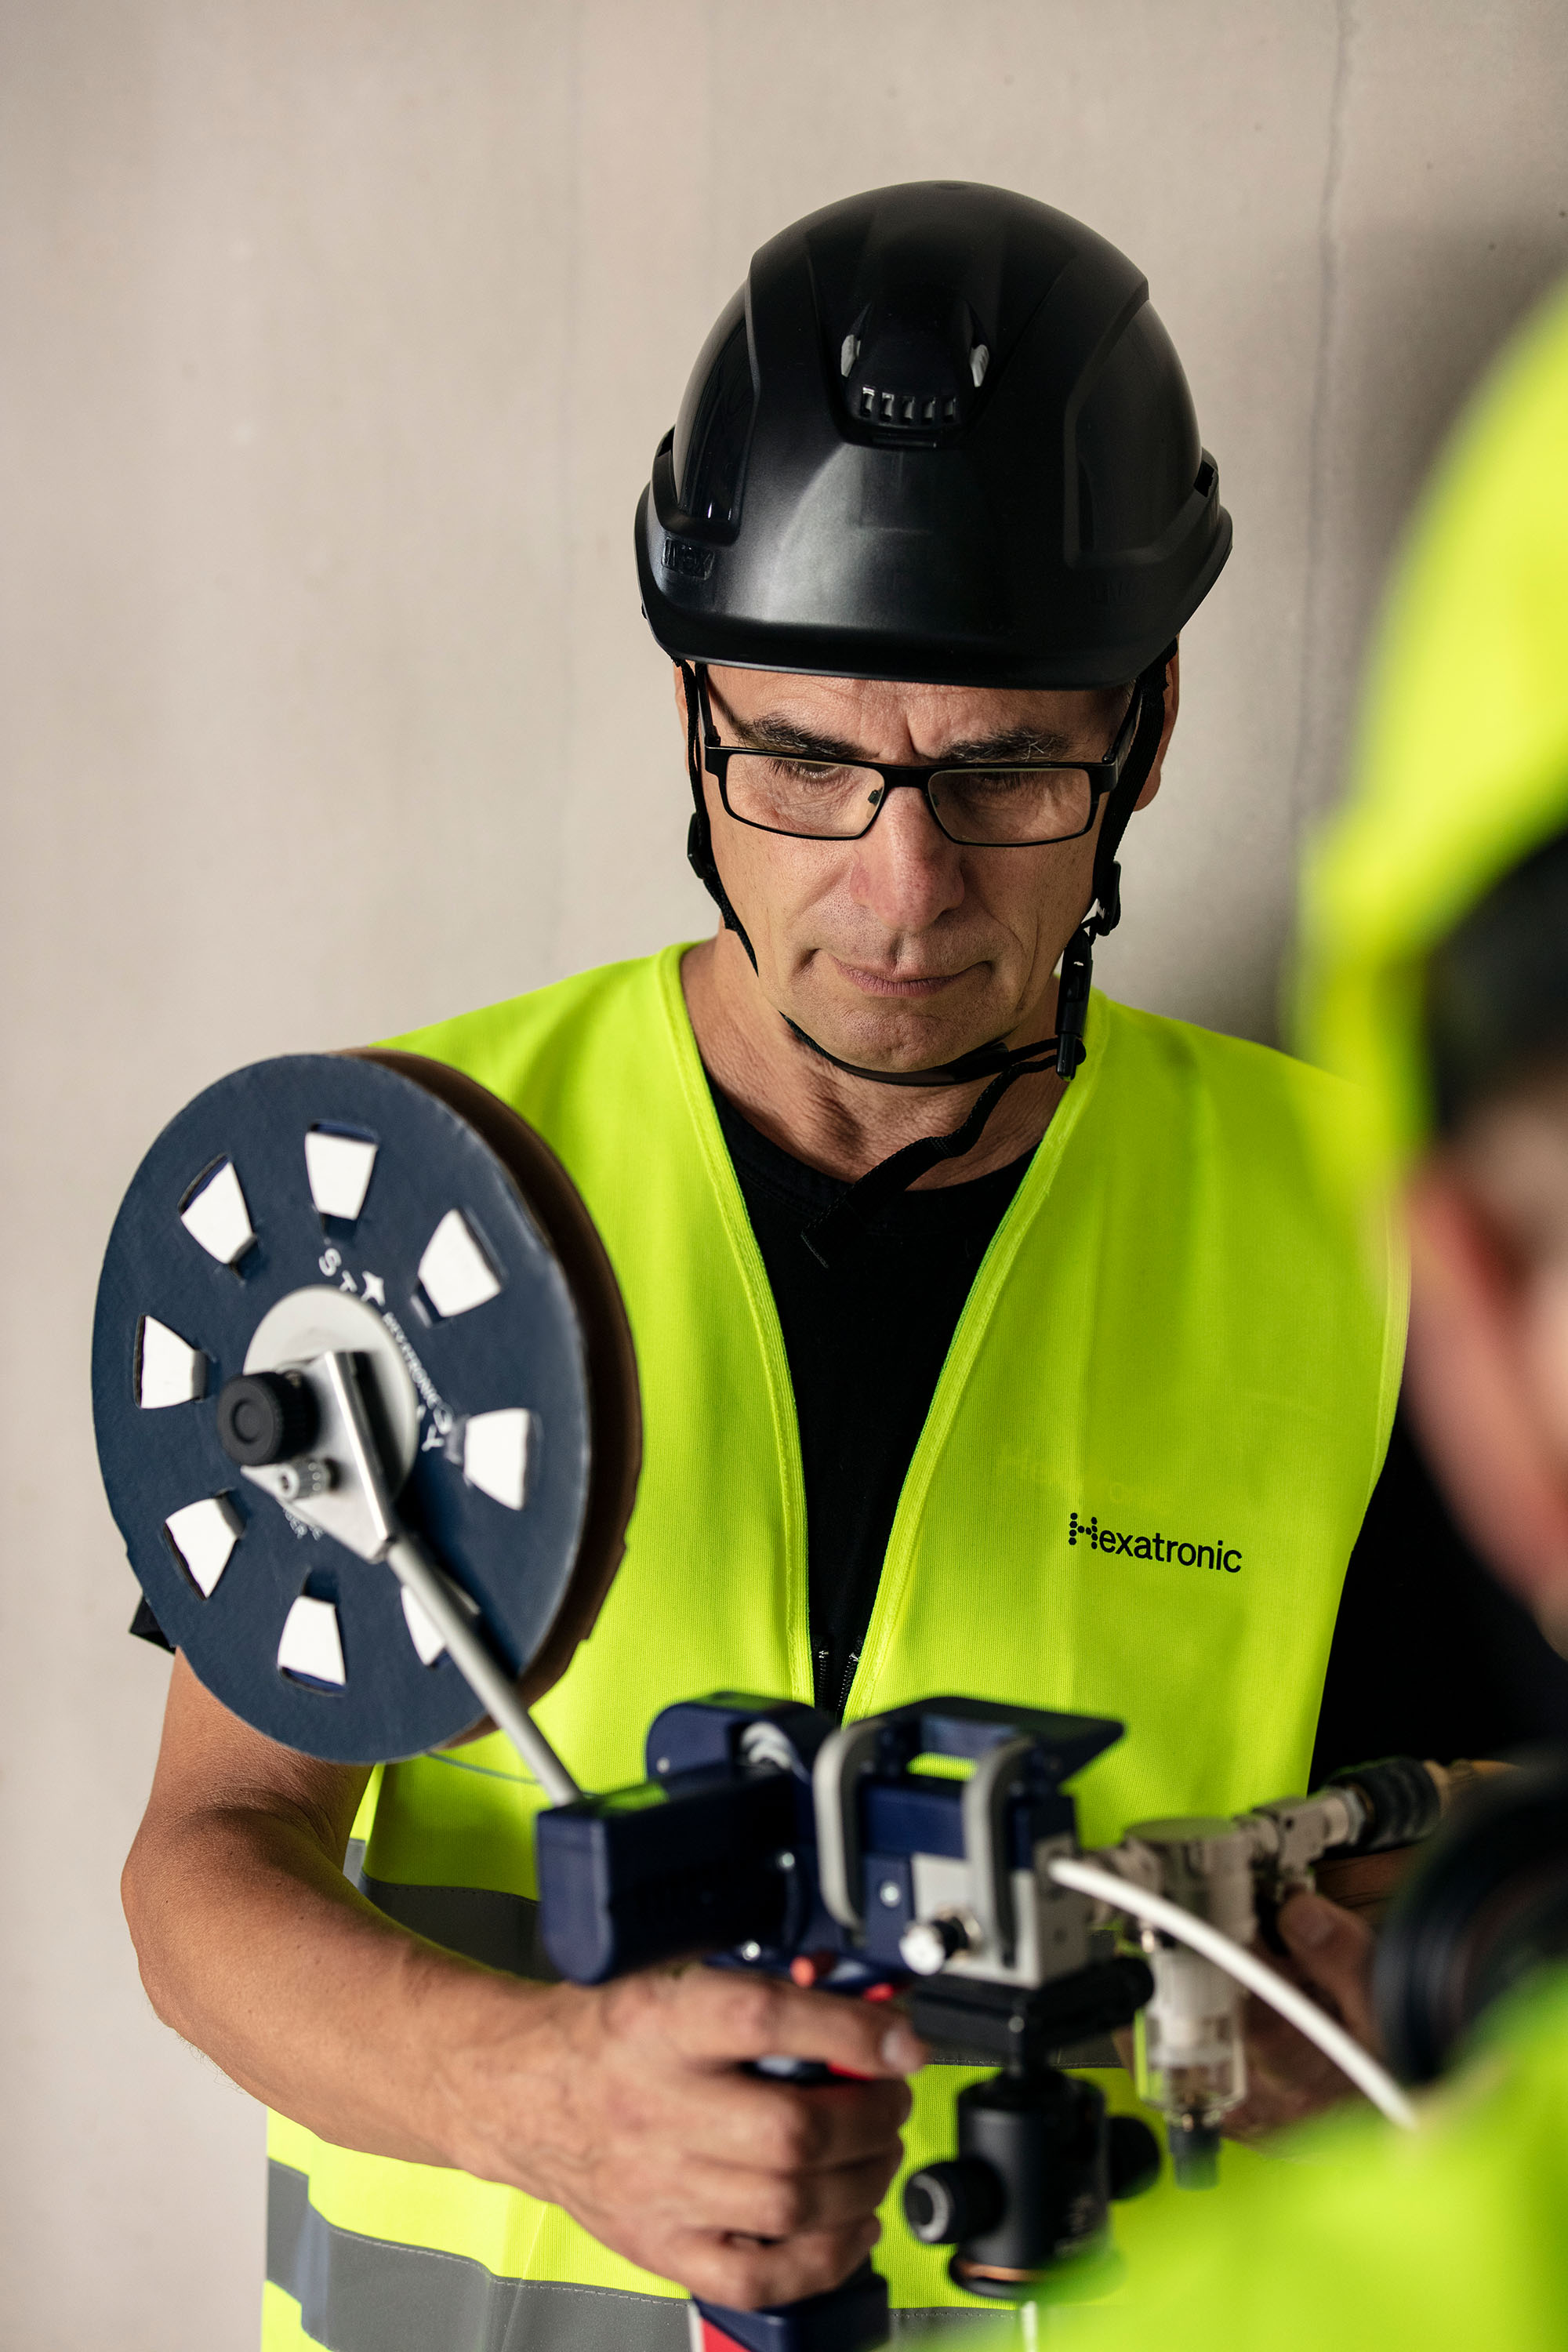 A worker in safety gear, marked ”Hexatronic